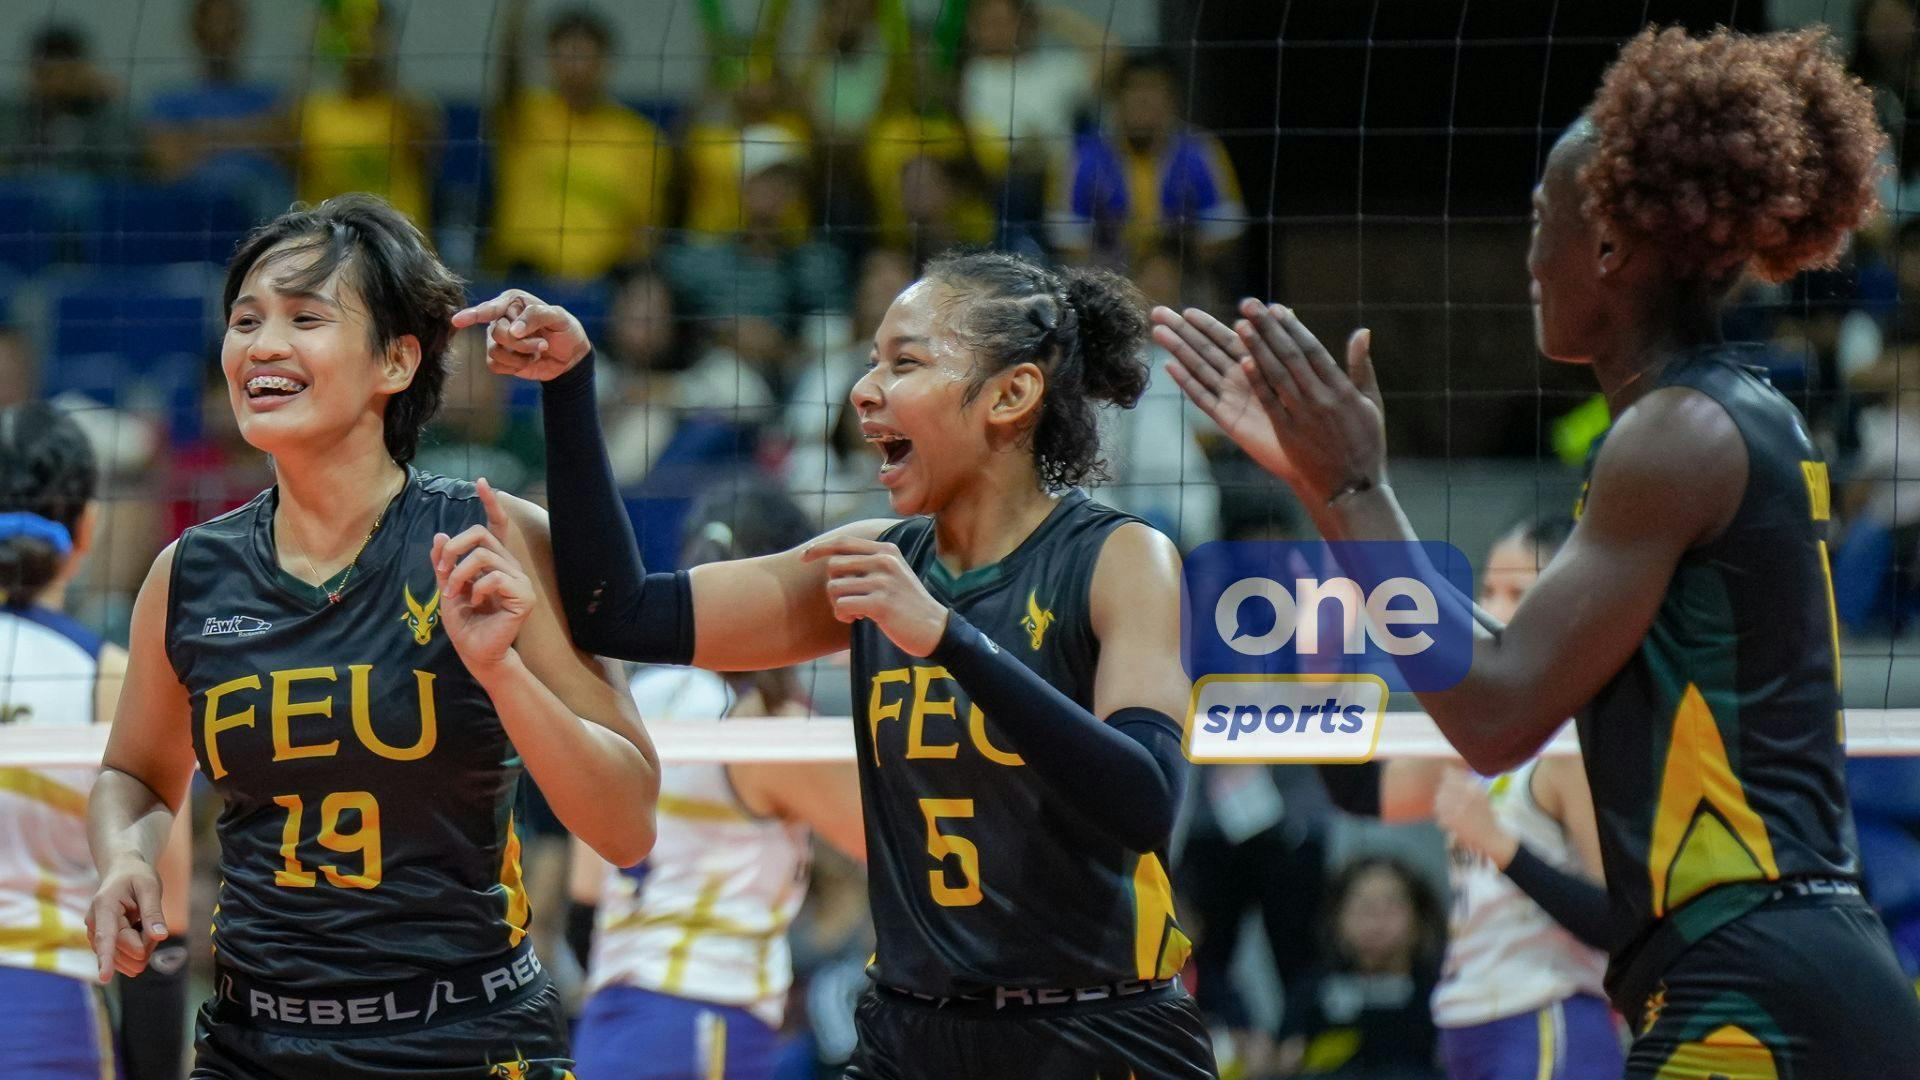 UAAP: Tin Ubaldo, FEU stun no. 1 NU in straight sets to force do-or-die match in Final Four